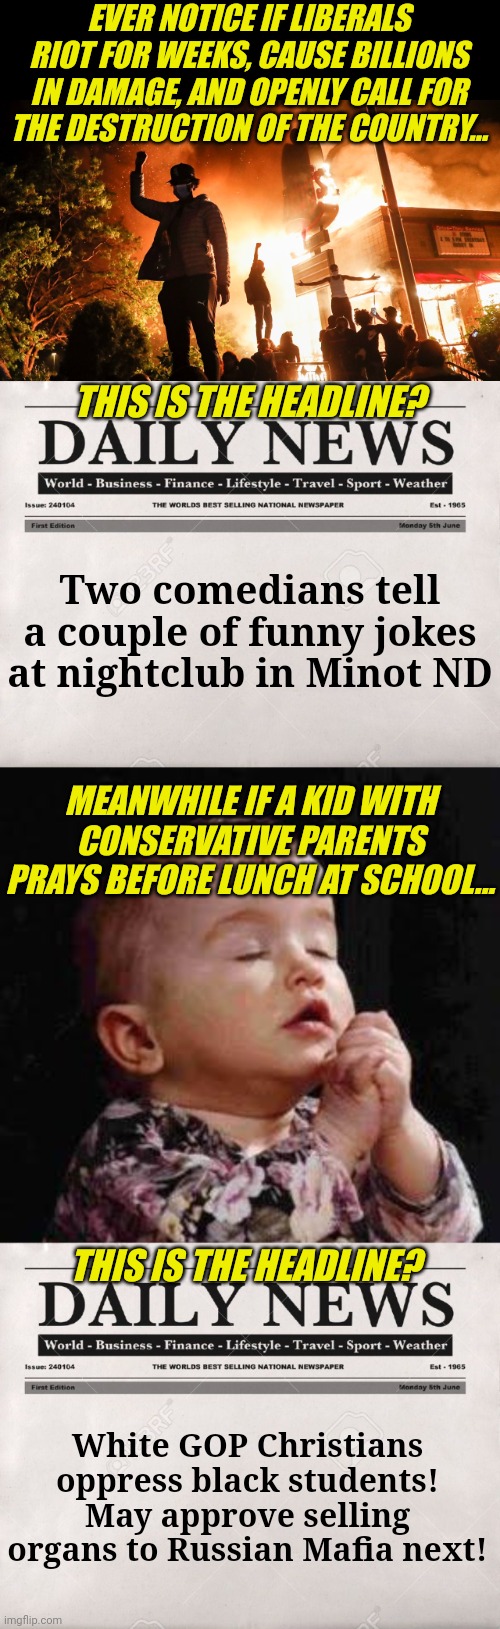 Are you a victim of liberal social engineering? What took you so long to figure it out? | EVER NOTICE IF LIBERALS RIOT FOR WEEKS, CAUSE BILLIONS IN DAMAGE, AND OPENLY CALL FOR THE DESTRUCTION OF THE COUNTRY... THIS IS THE HEADLINE? Two comedians tell a couple of funny jokes at nightclub in Minot ND; MEANWHILE IF A KID WITH CONSERVATIVE PARENTS PRAYS BEFORE LUNCH AT SCHOOL... THIS IS THE HEADLINE? White GOP Christians oppress black students! May approve selling organs to Russian Mafia next! | image tagged in blm riots,newspaper,liberal hypocrisy,brainwashing,democratic socialism,school | made w/ Imgflip meme maker